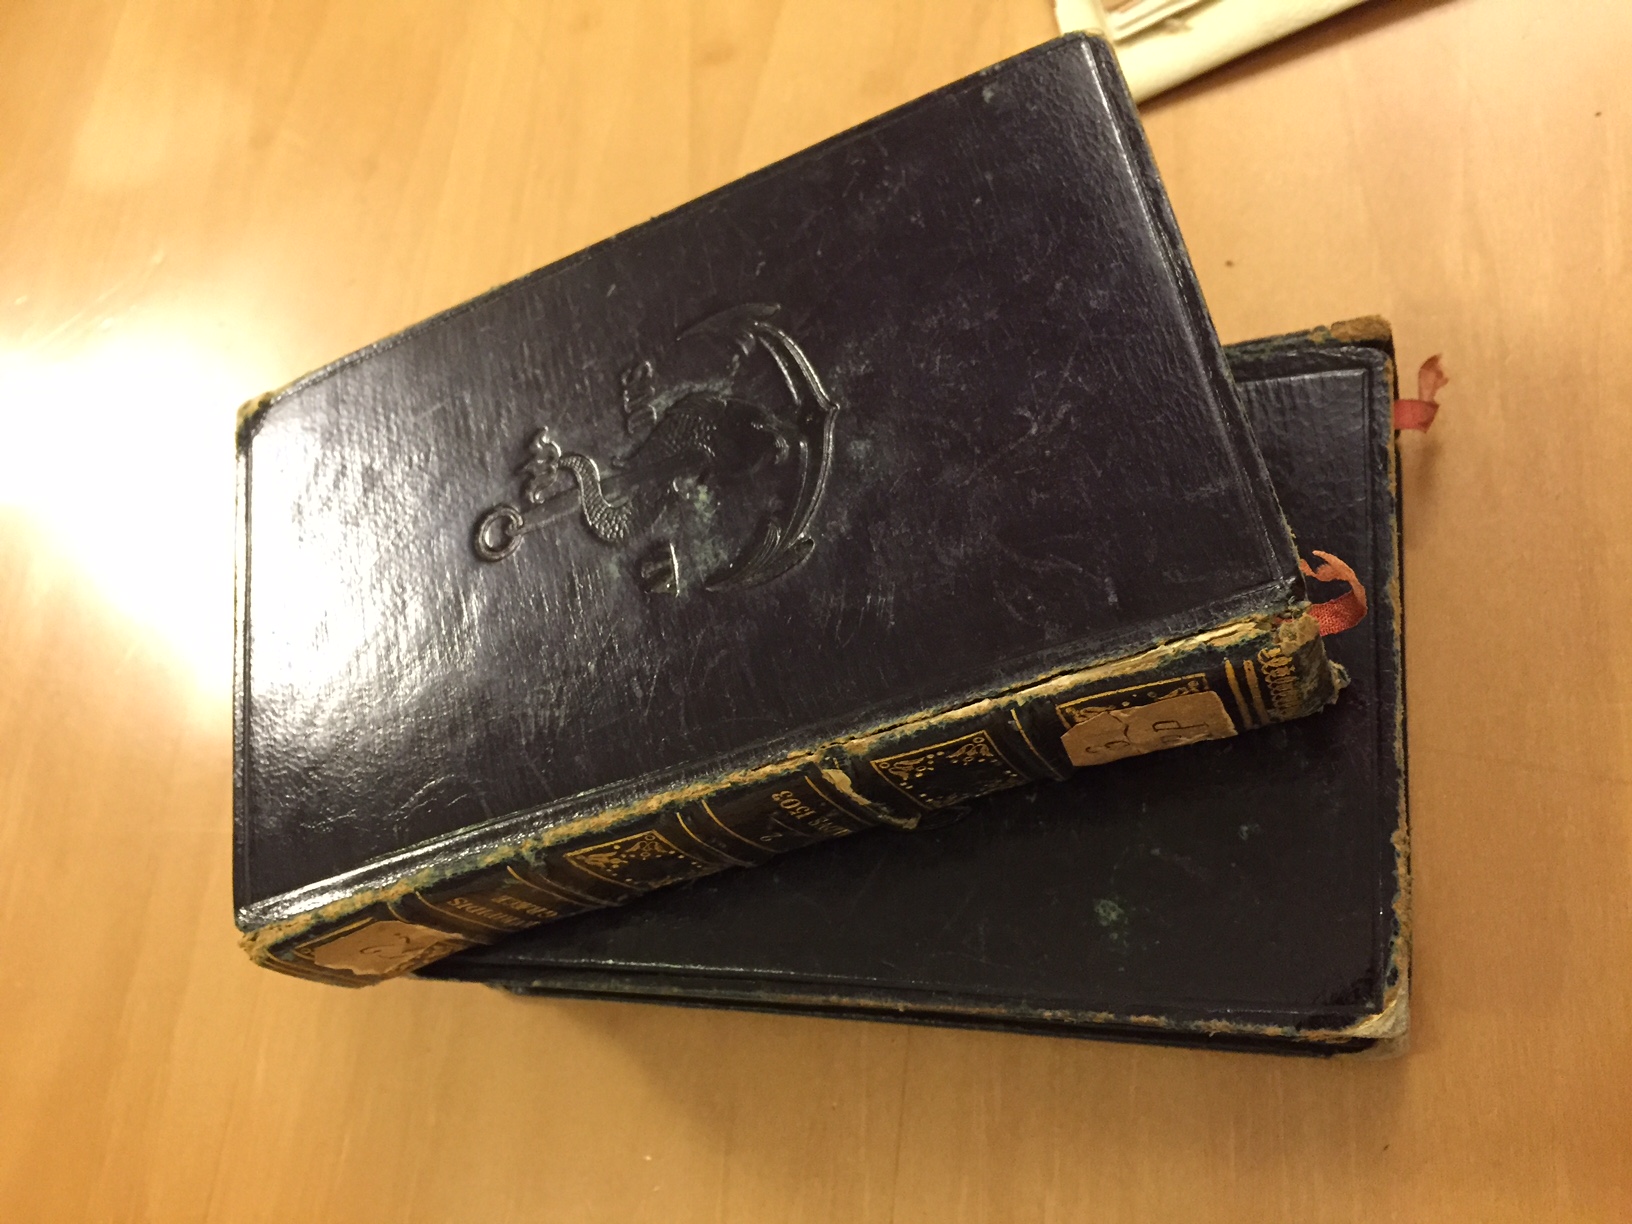 Old books with black cover and embossed seal on them.